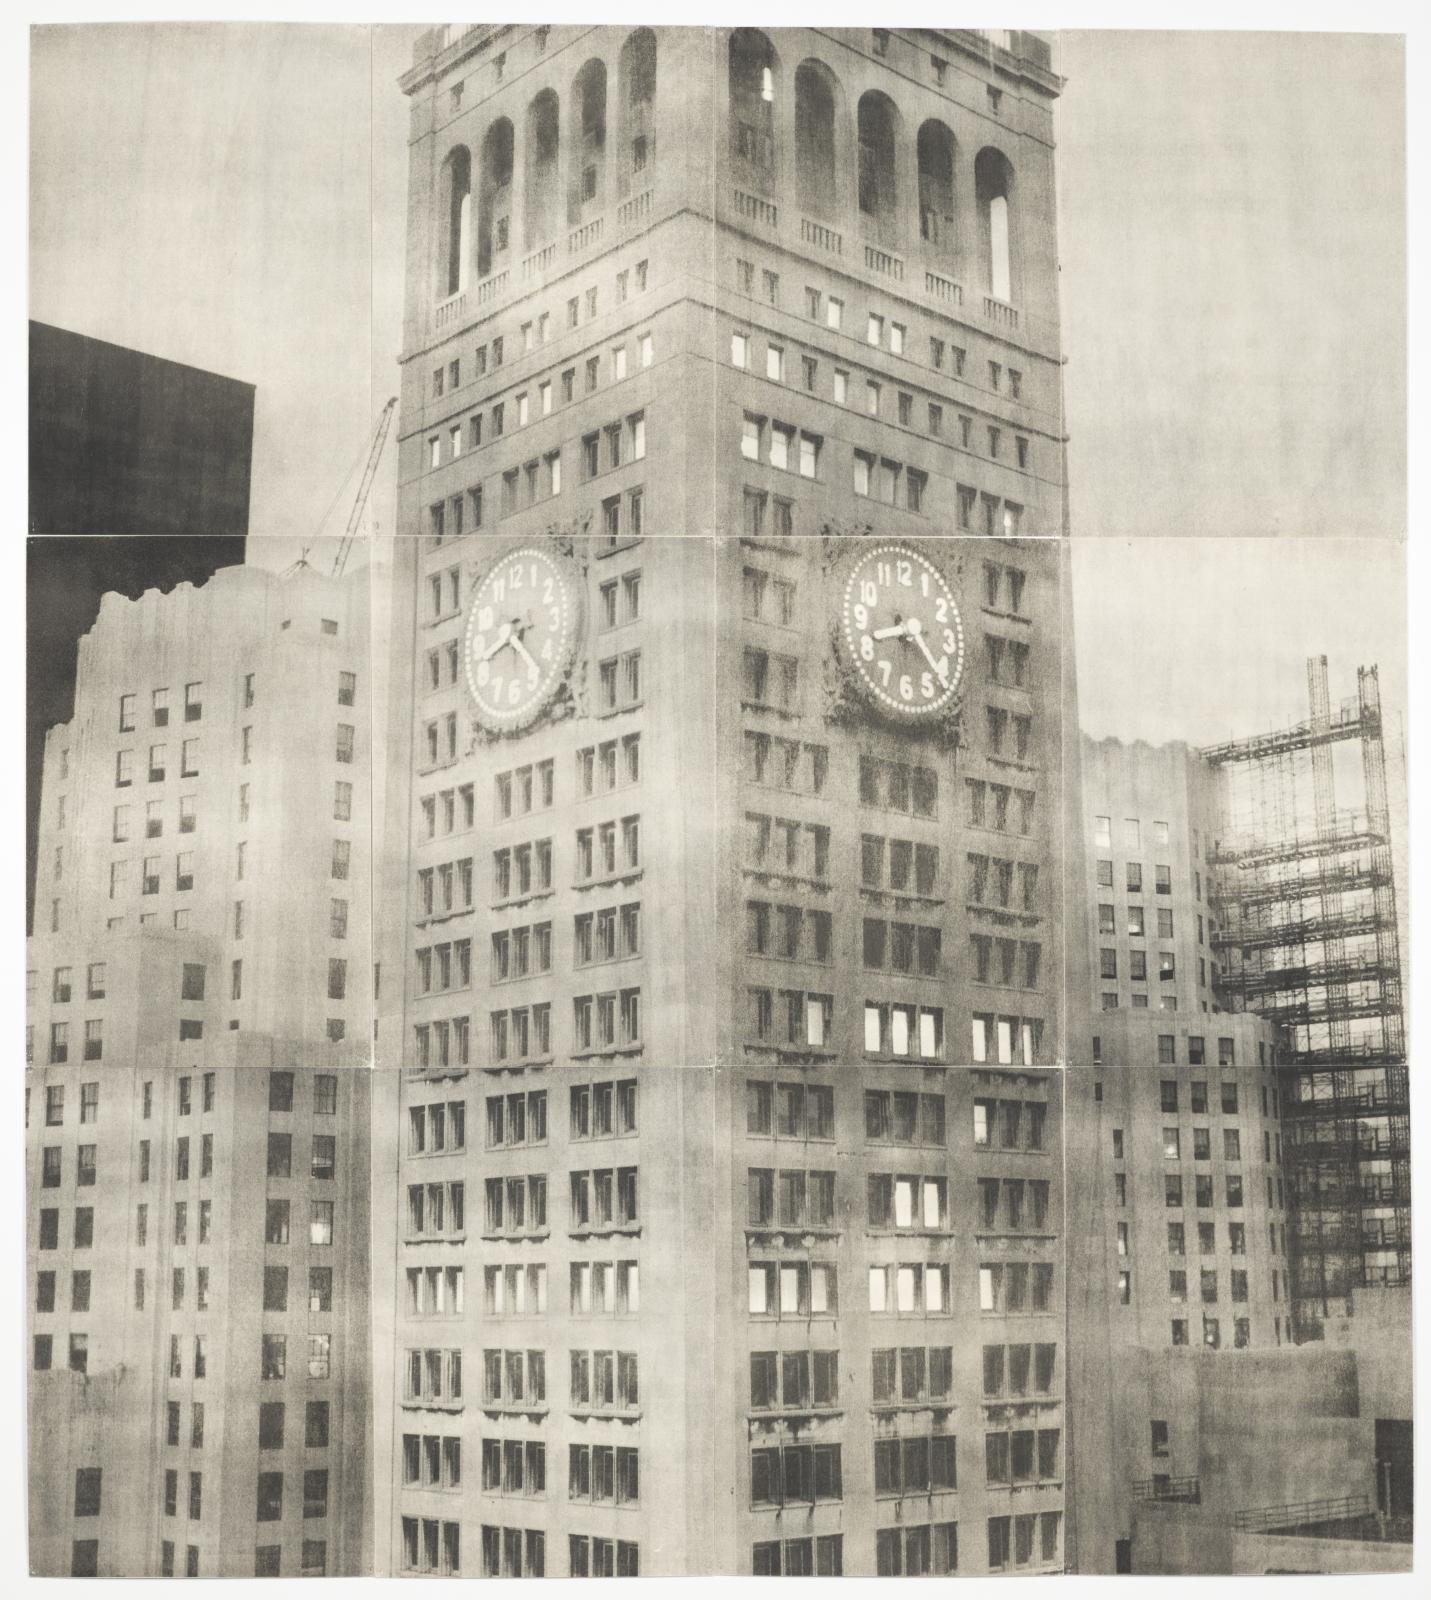 An aged black-and-white photograph shows tall buildings, with the tallest in the center displaying two analog clock faces showing the time as 8:22.